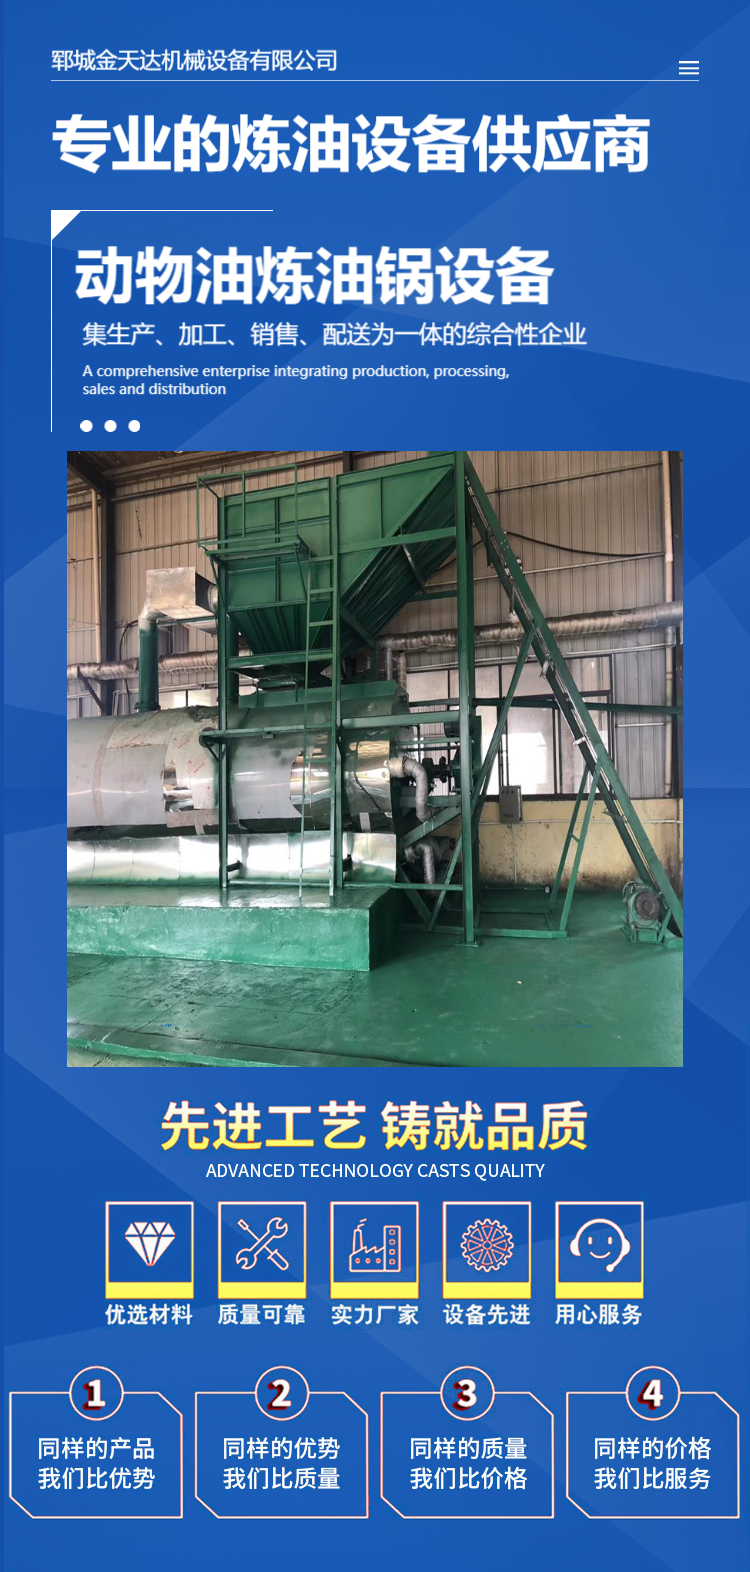 Animal oil and fat boiling pot, 2-ton boiler plate material - excellent heat resistance, Jintianda